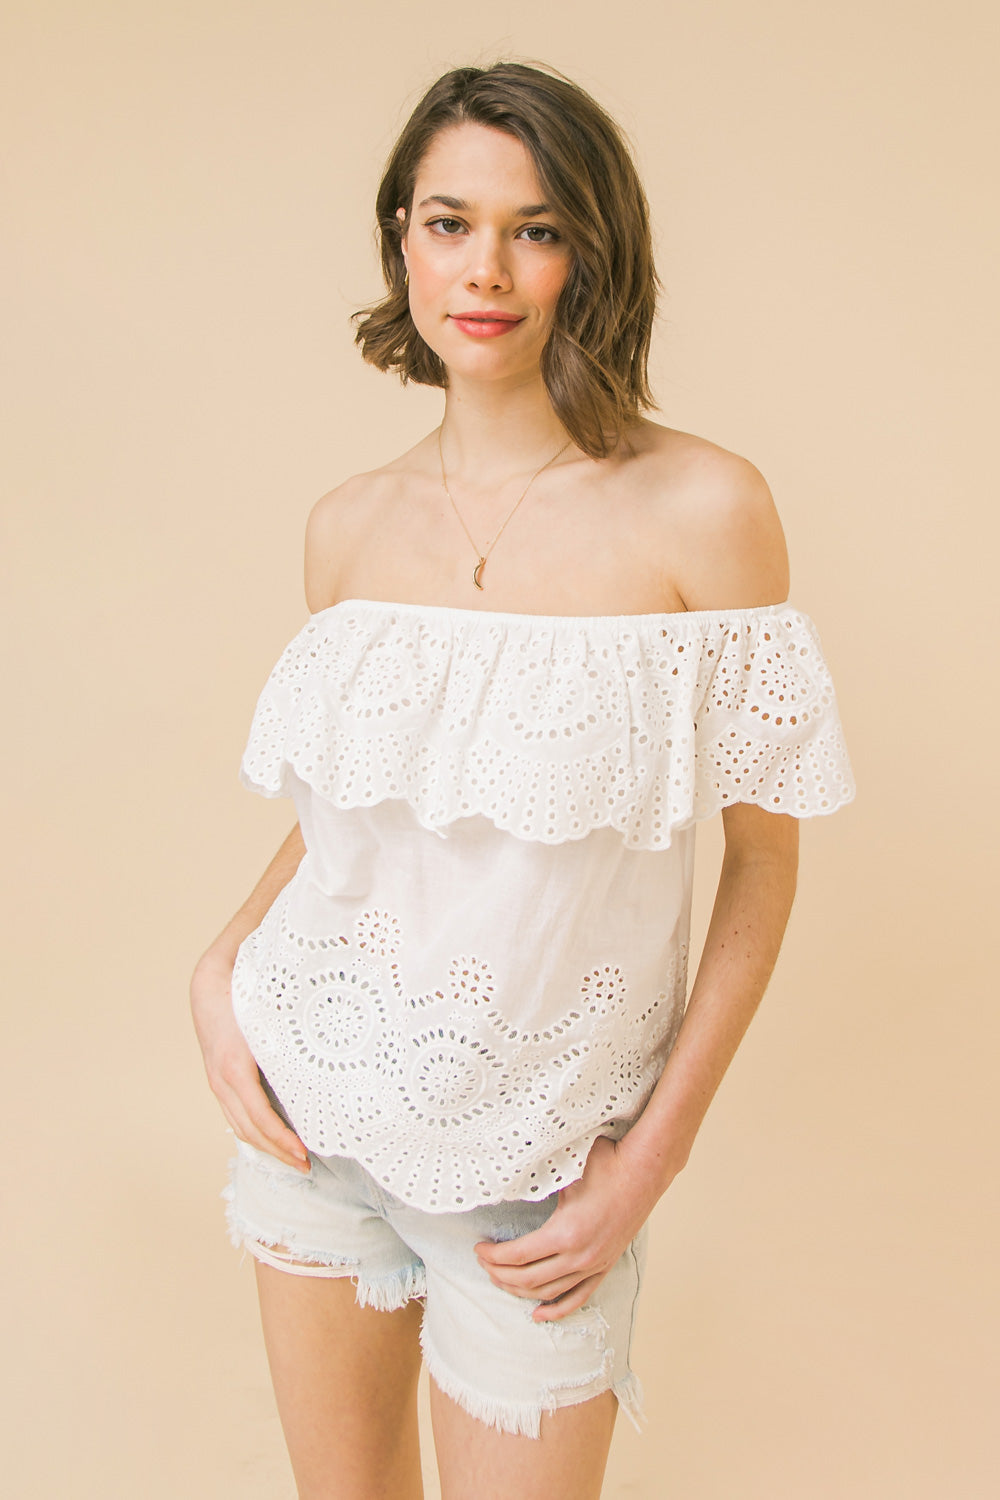 LEAD BY EXAMPLE EYELET TOP